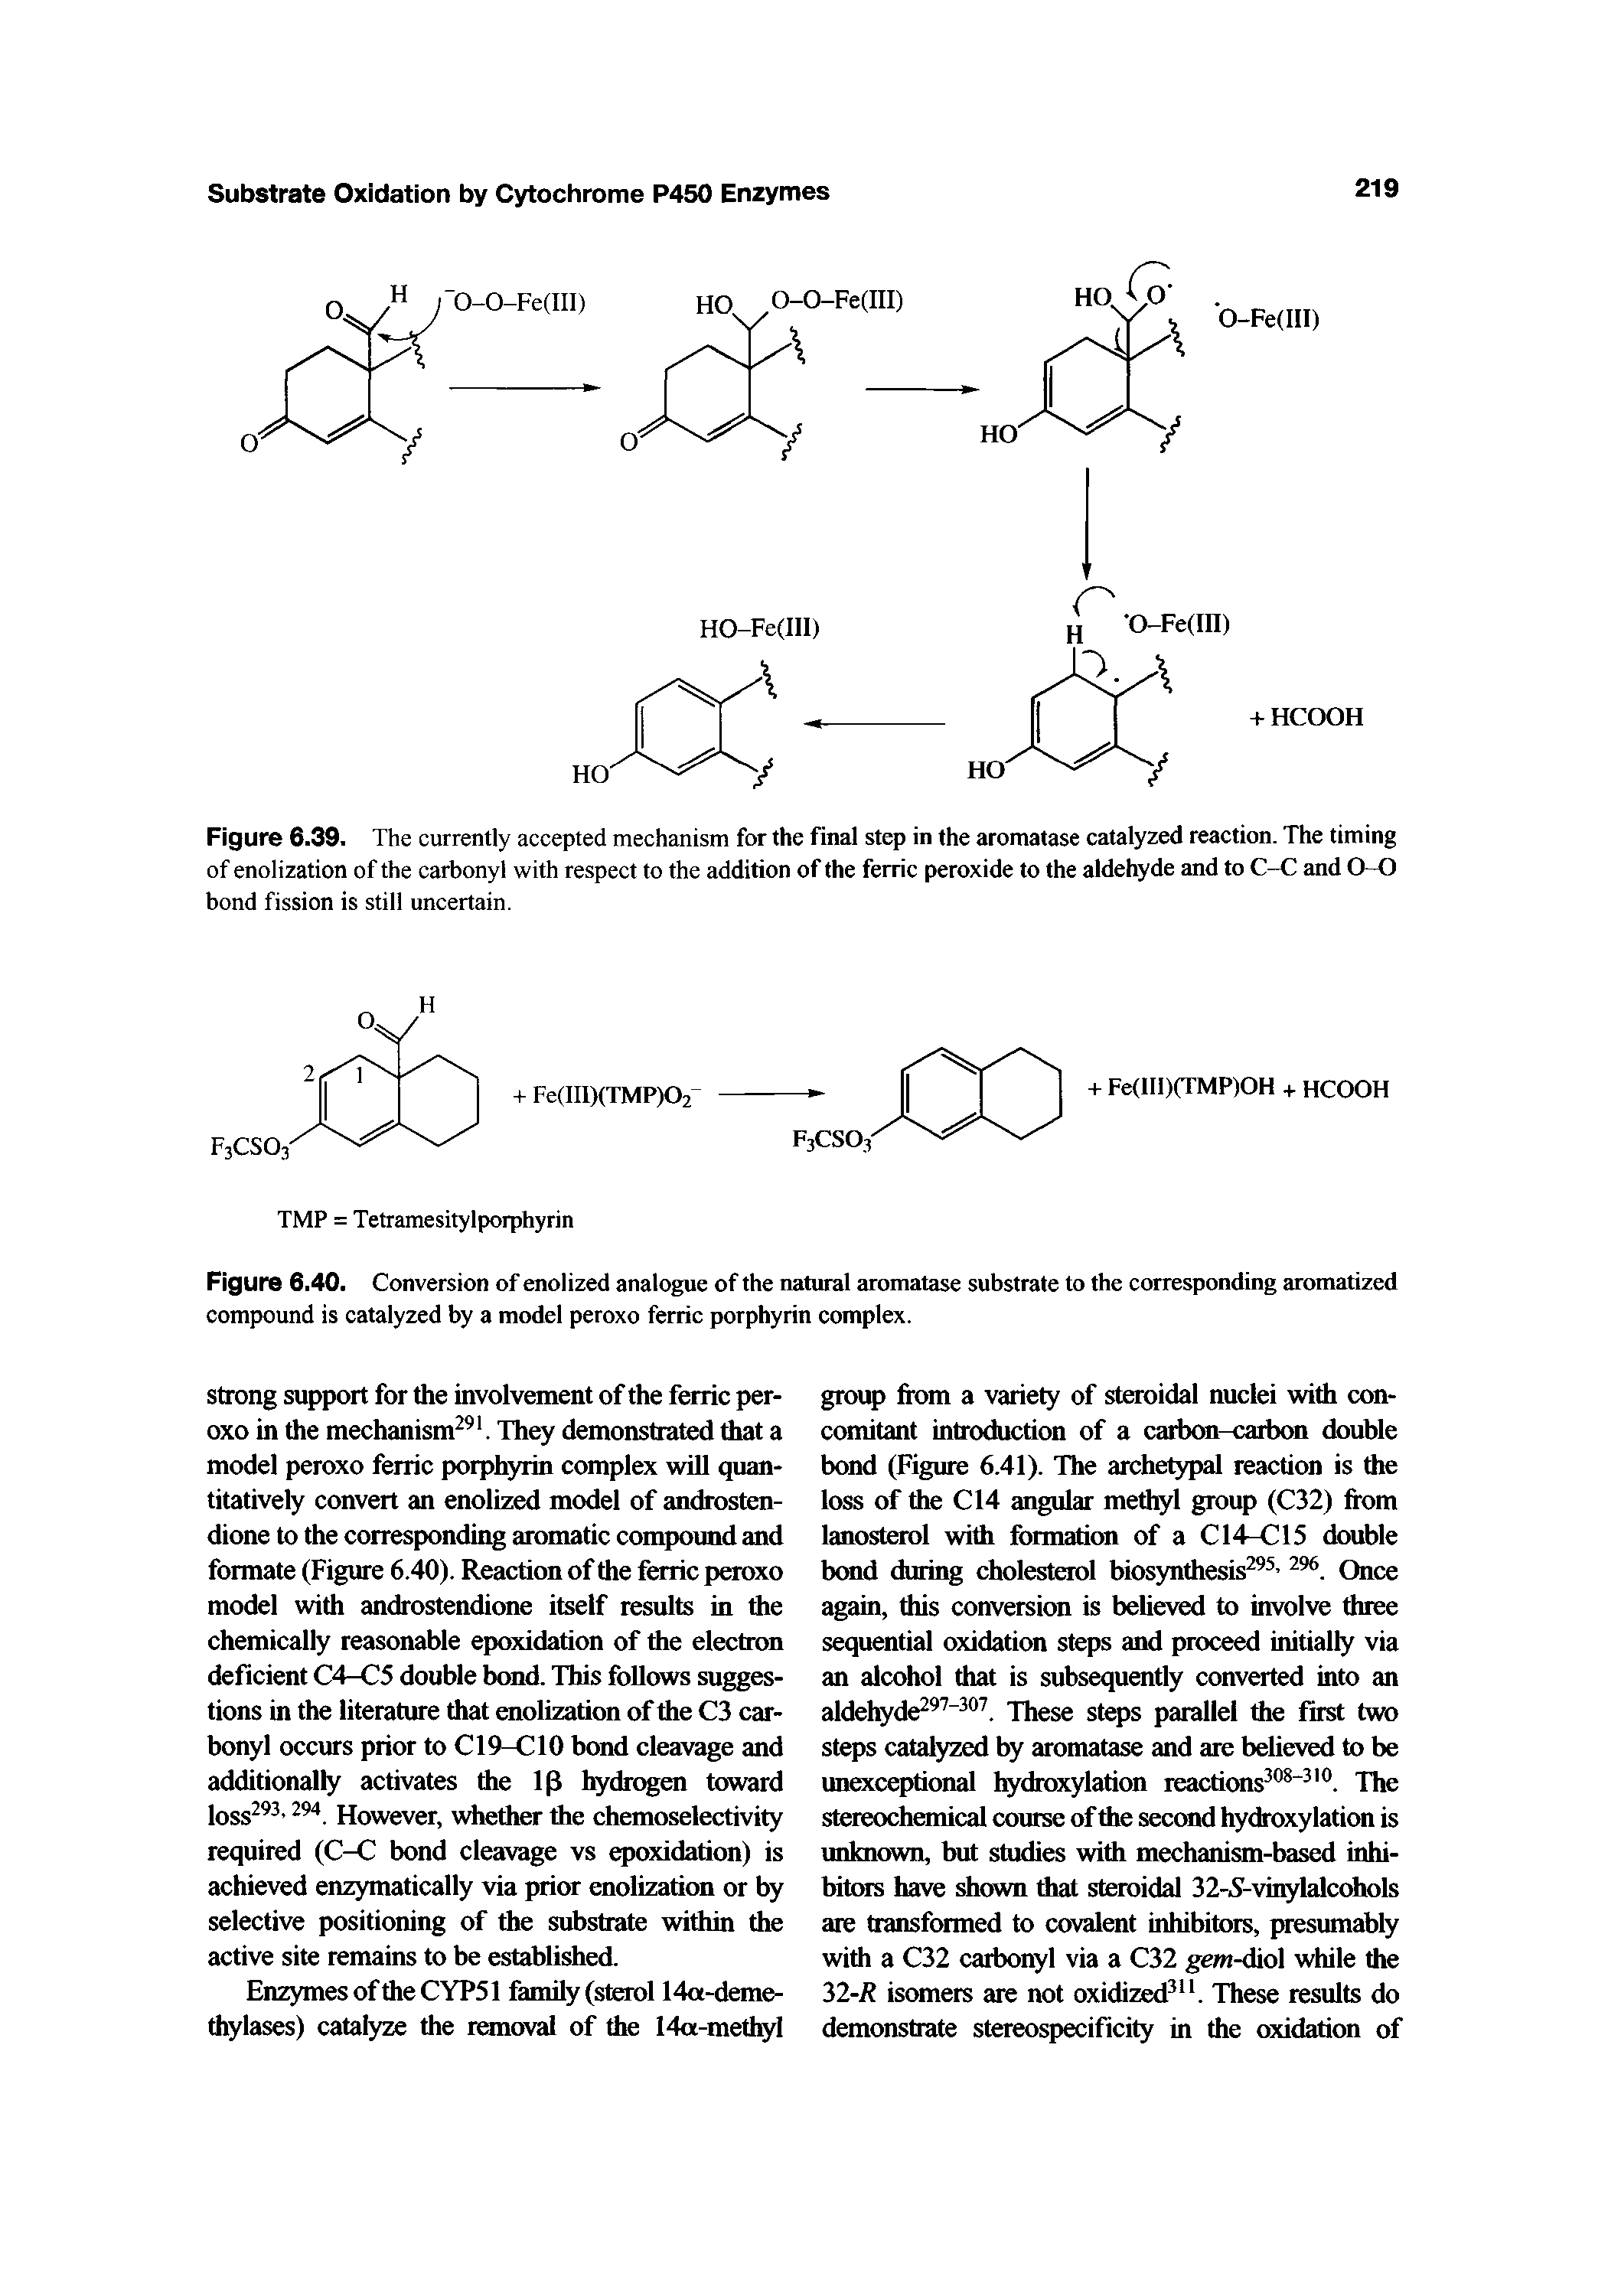 Figure 6.40. Conversion of enolized analogue of the mtural aromatase substrate to the corresponding aromatized compound is catalyzed by a model peroxo ferric porphyrin complex.